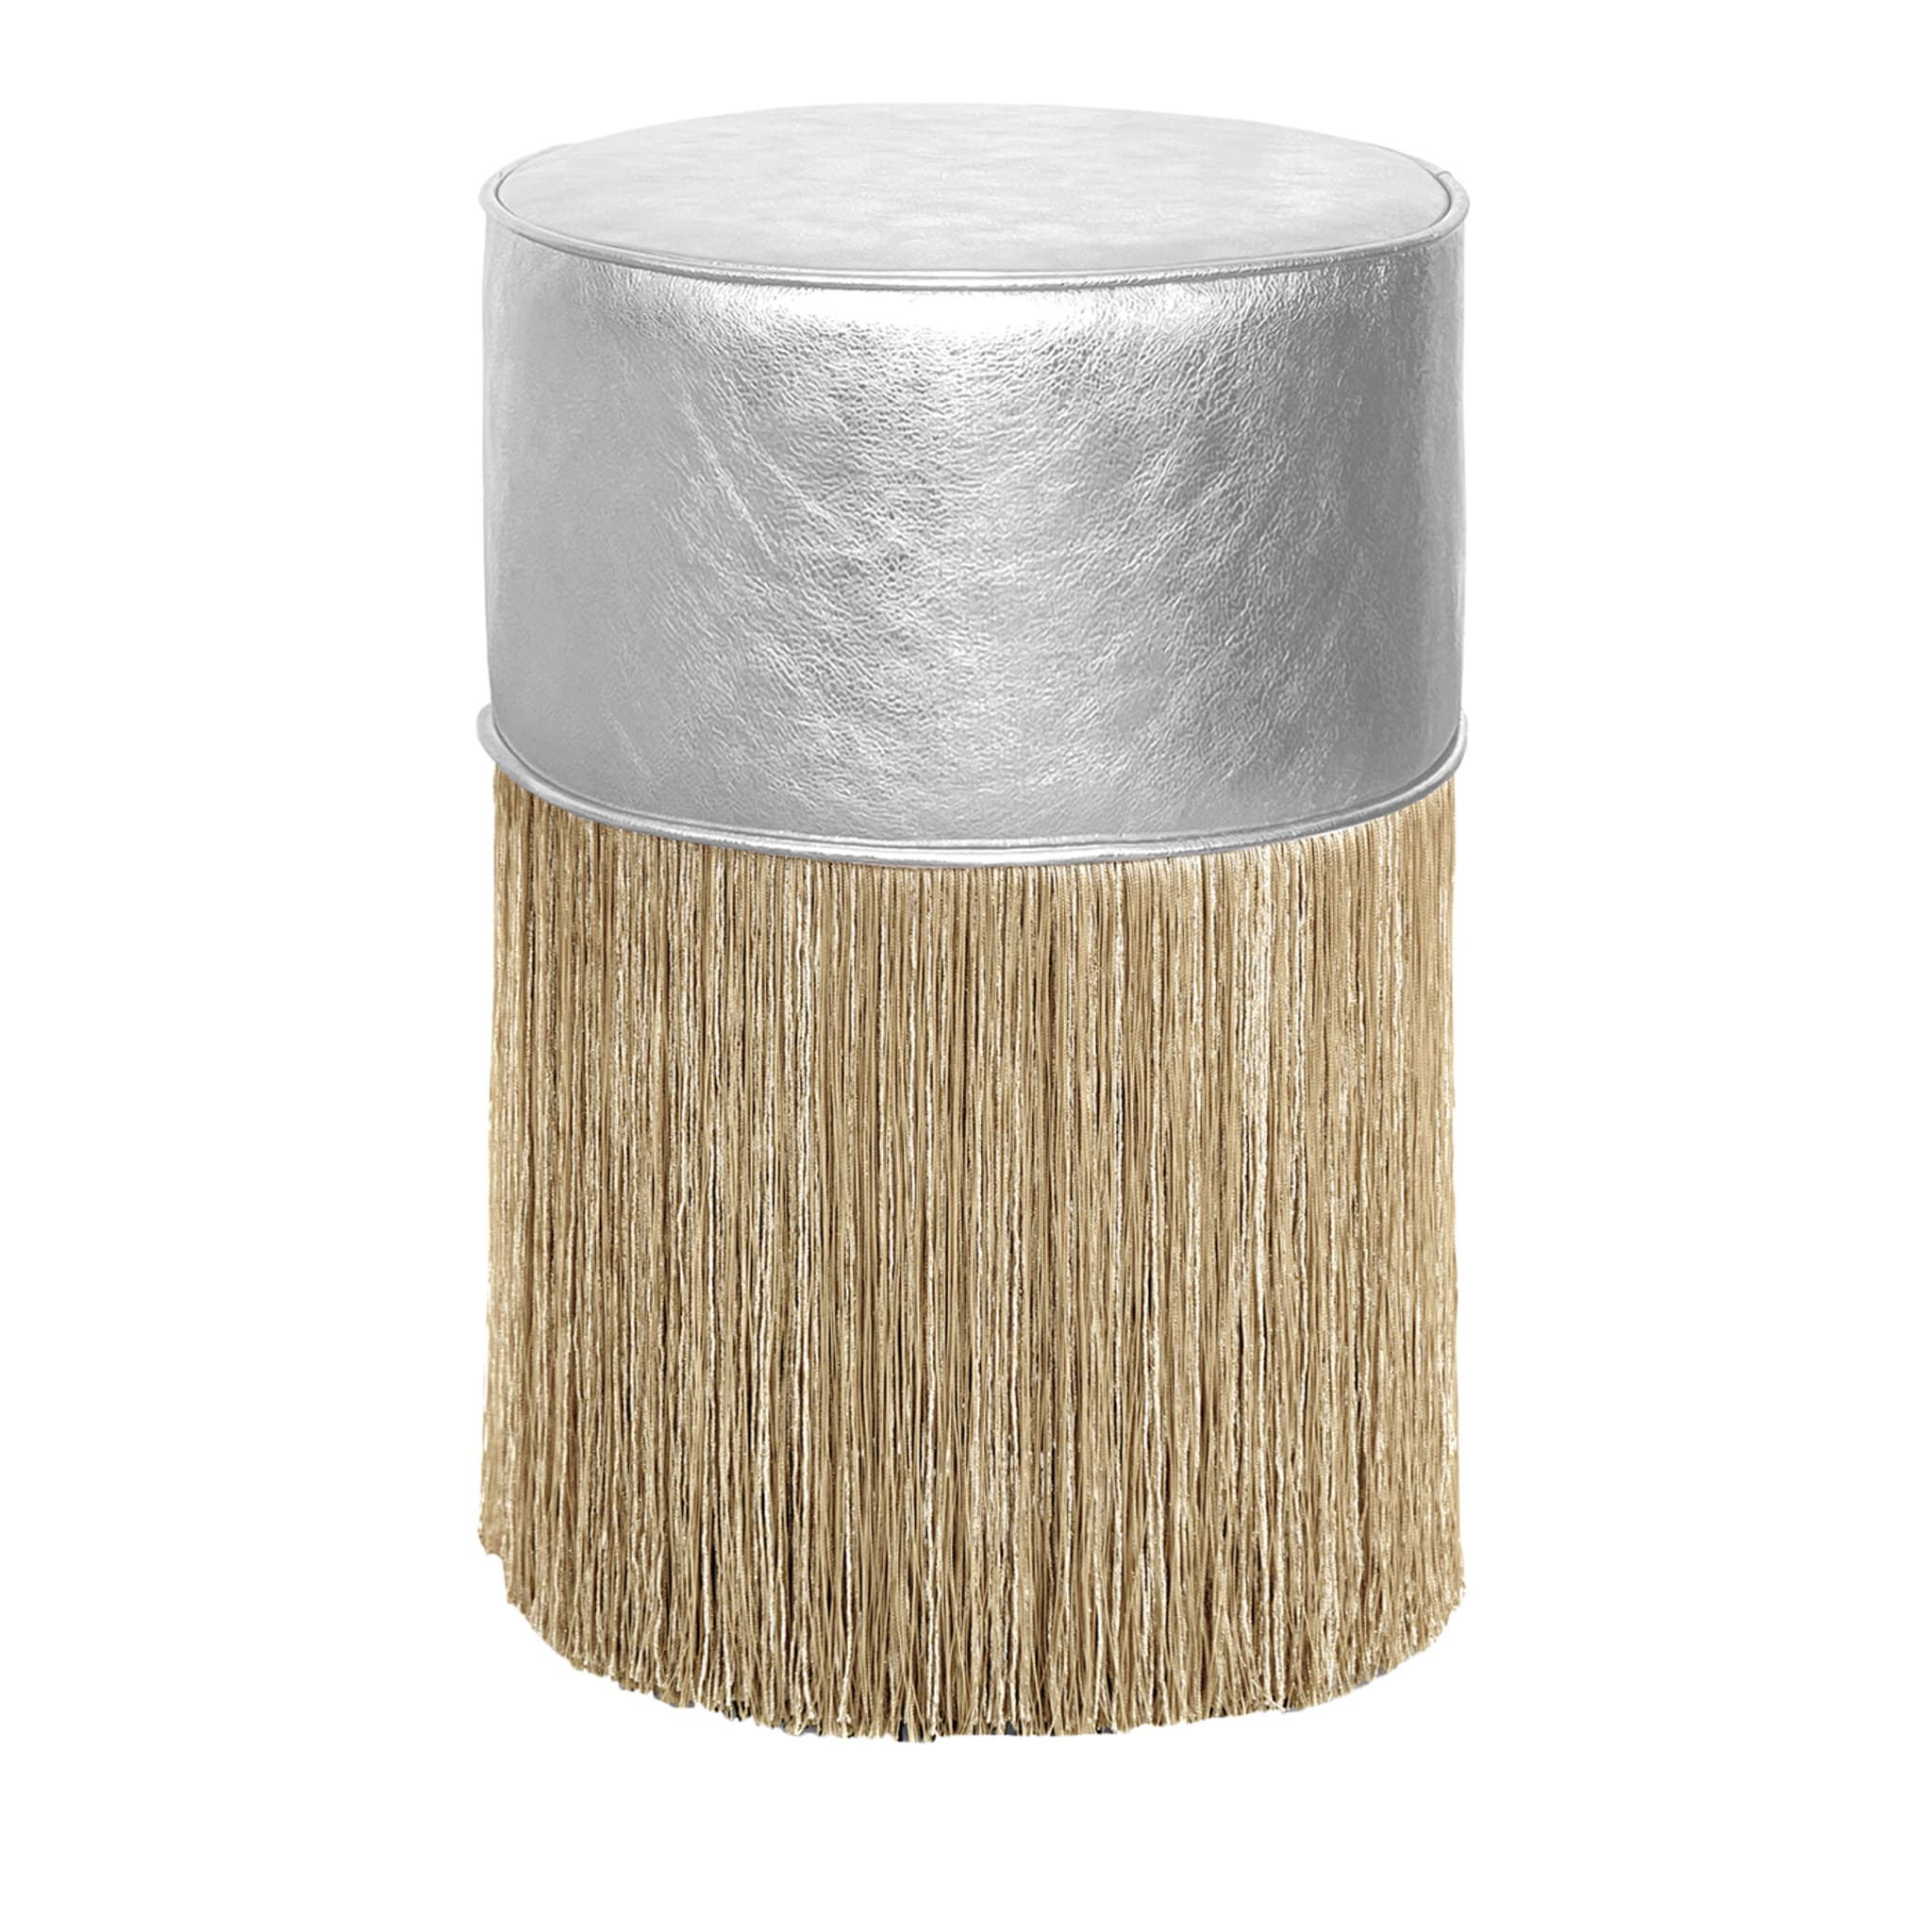 Gleaming Silver Leather Gold Fringes Pouf by Lorenza Bozzoli - Main view